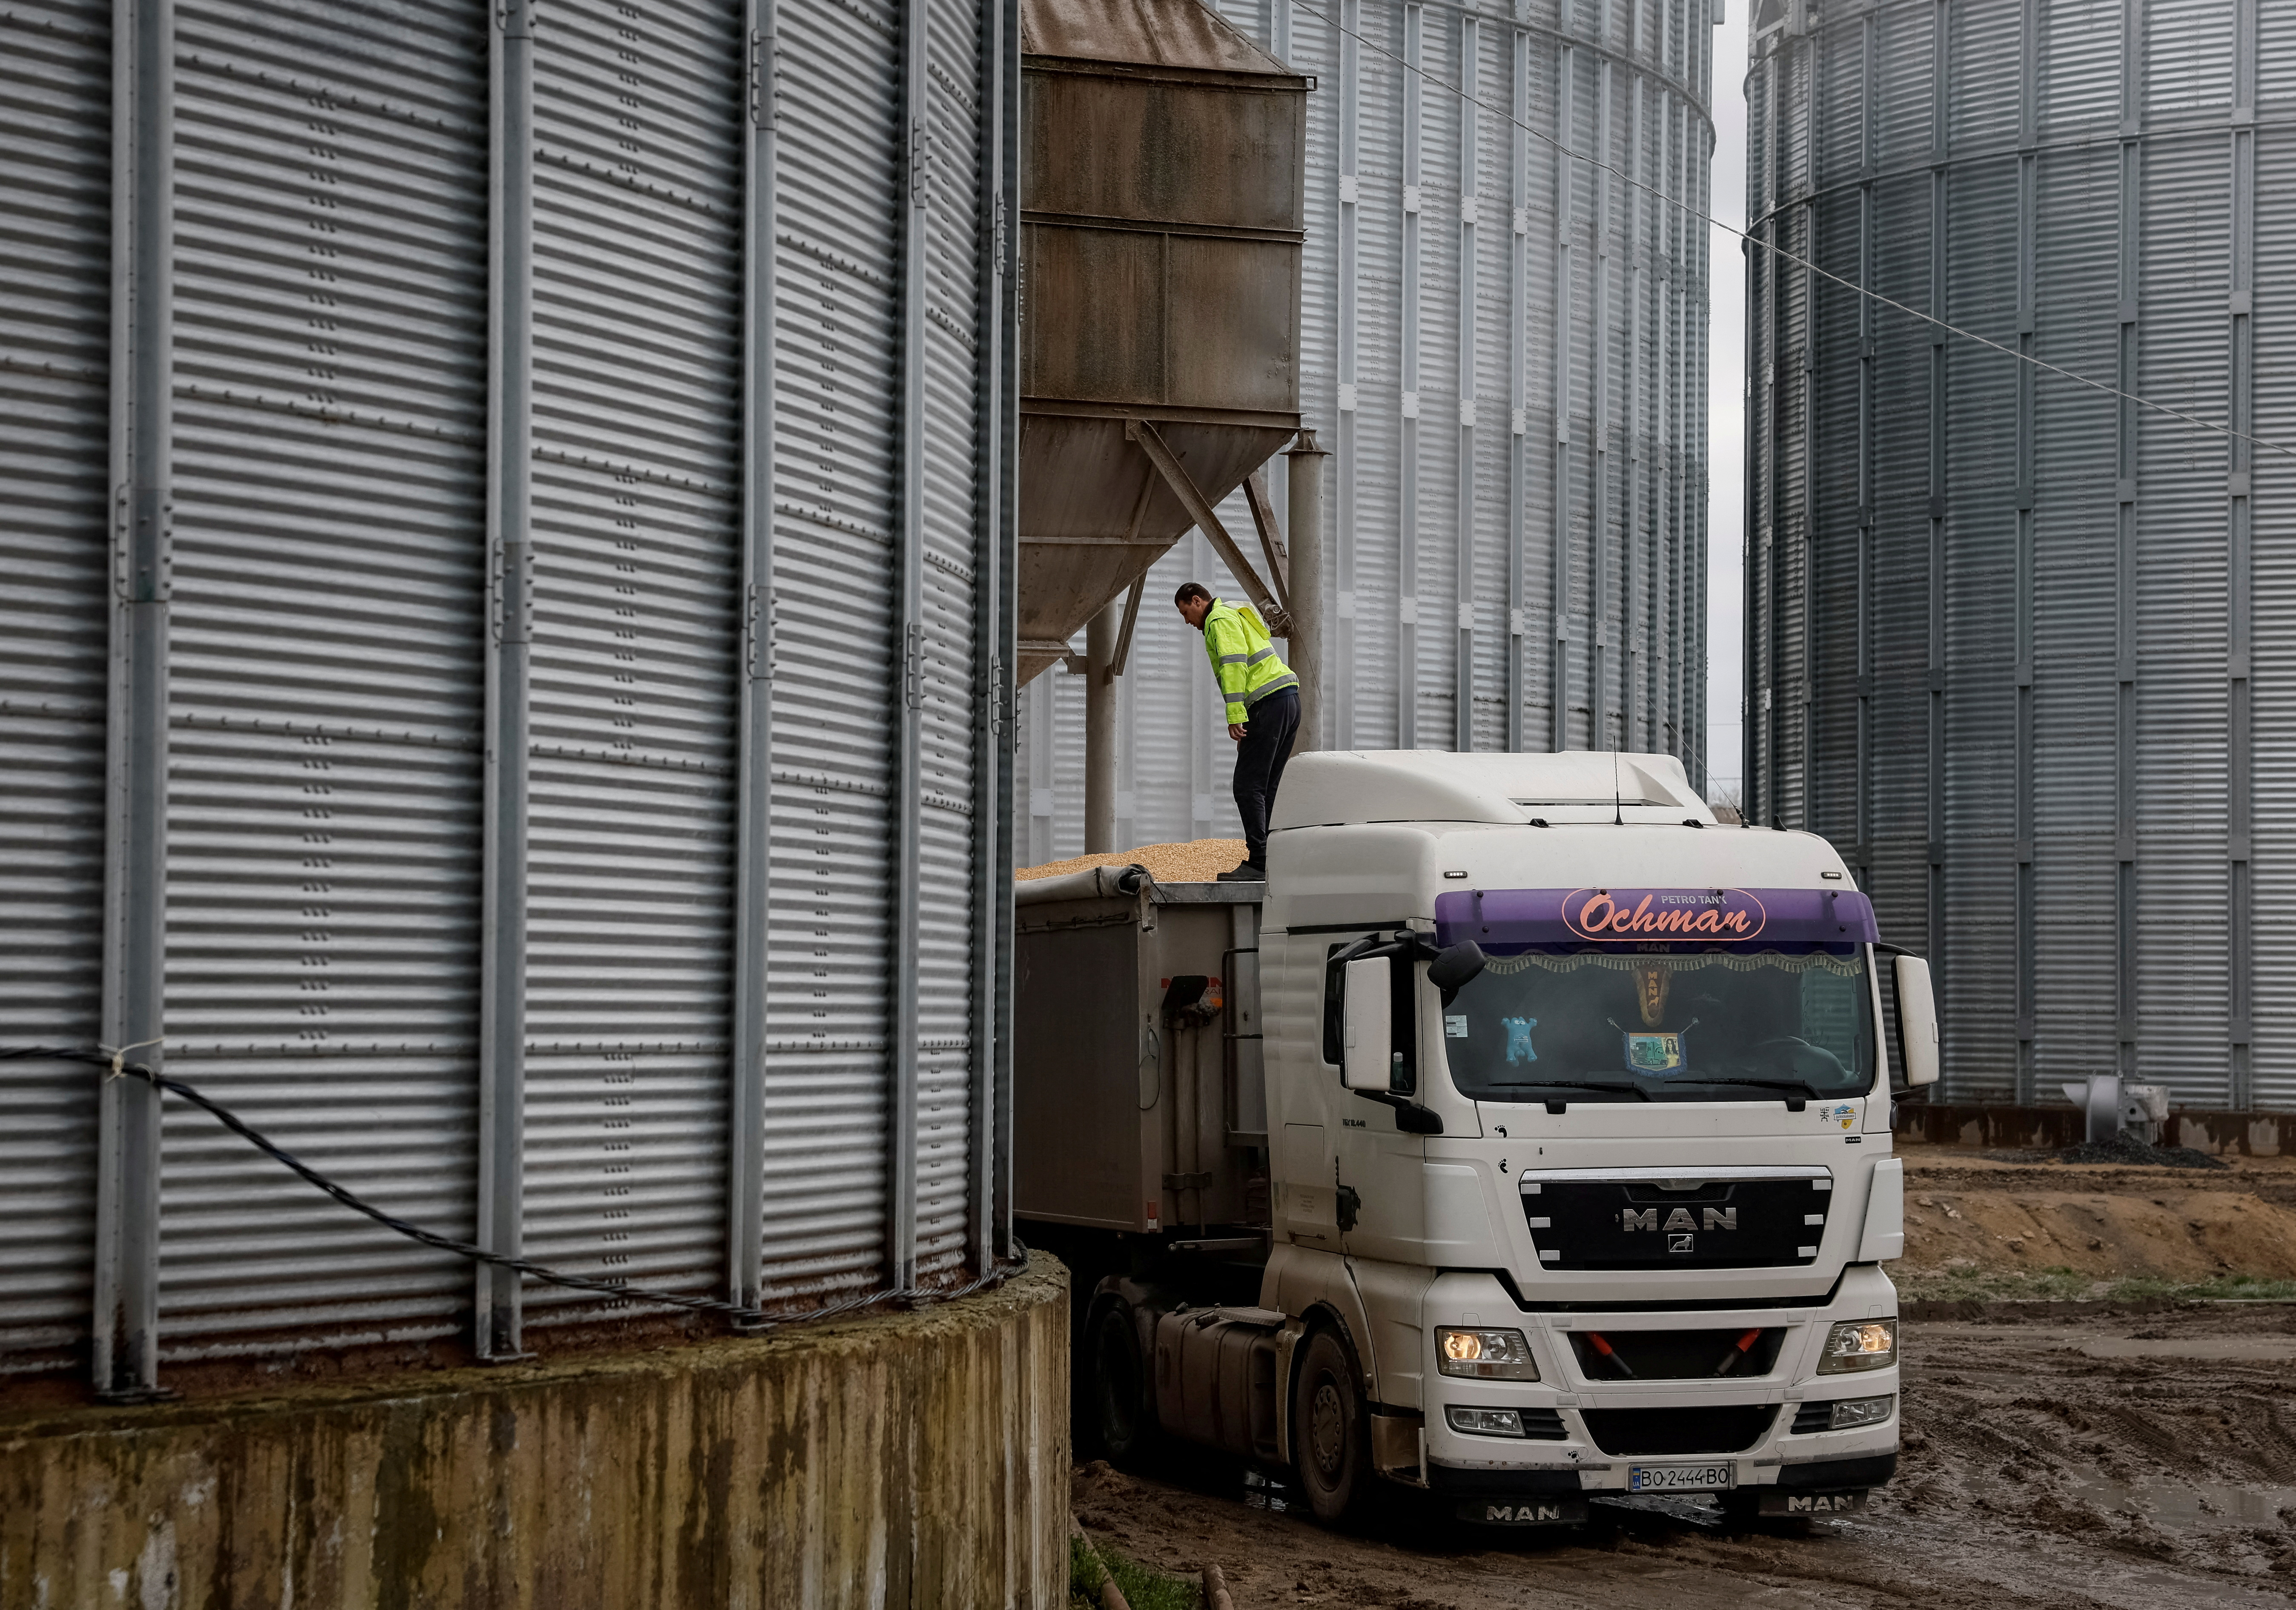 A truck filled with corn is seen at a grain storage facility in Bilohiria village